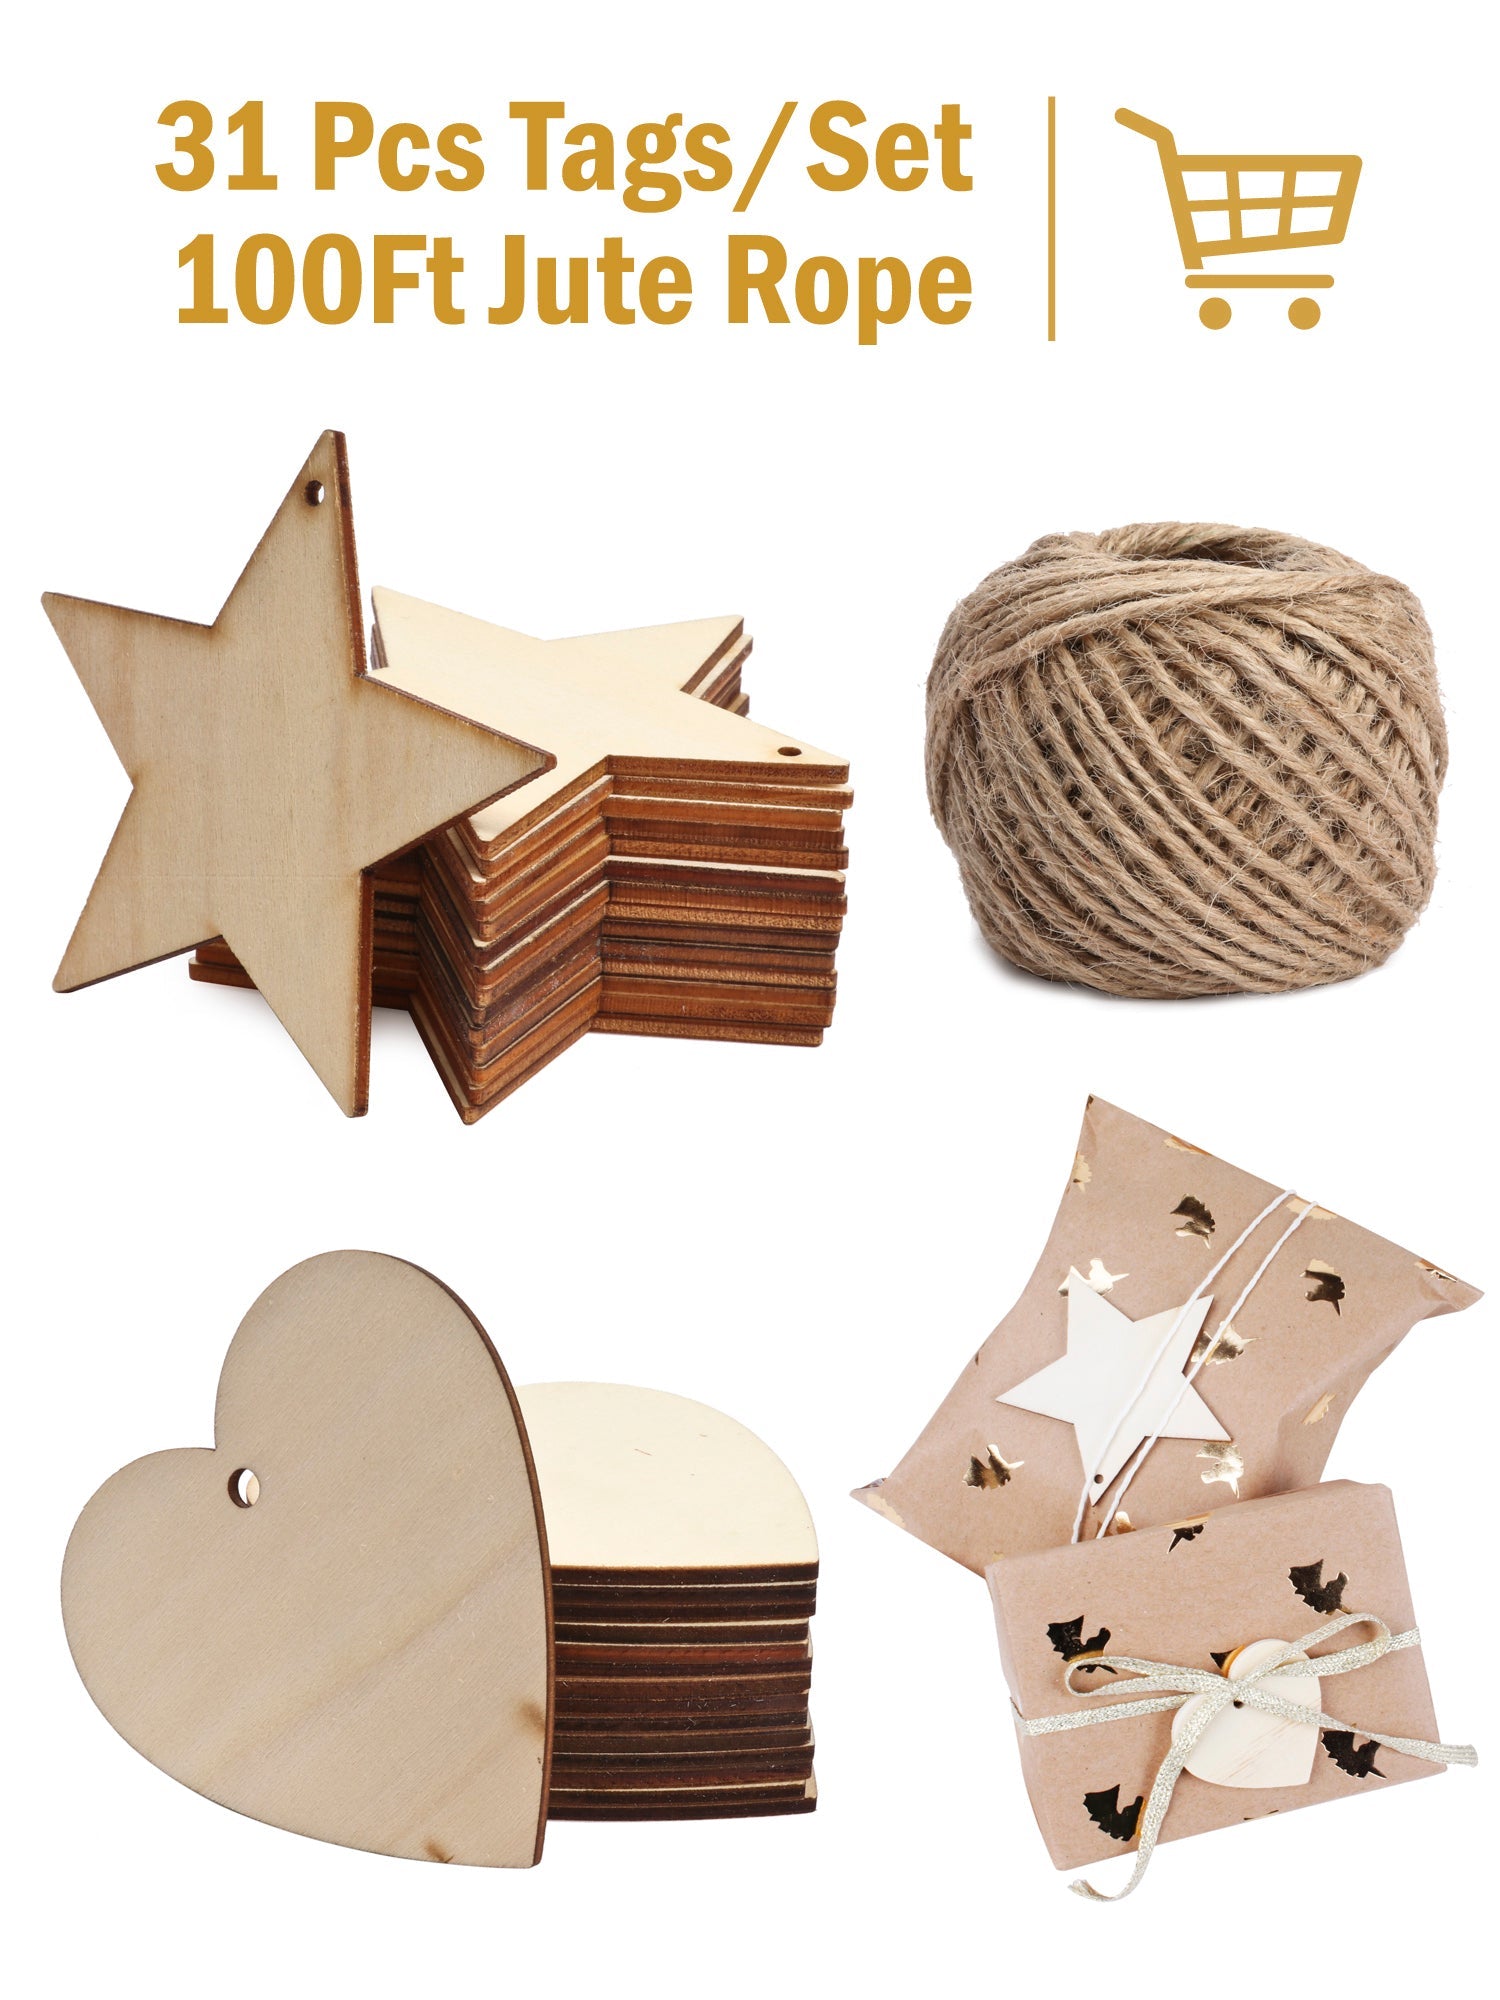 30Pcs Wooden Gift Tags with Holes and 100ft Jute Twine for Gifts Wrapping Decoration